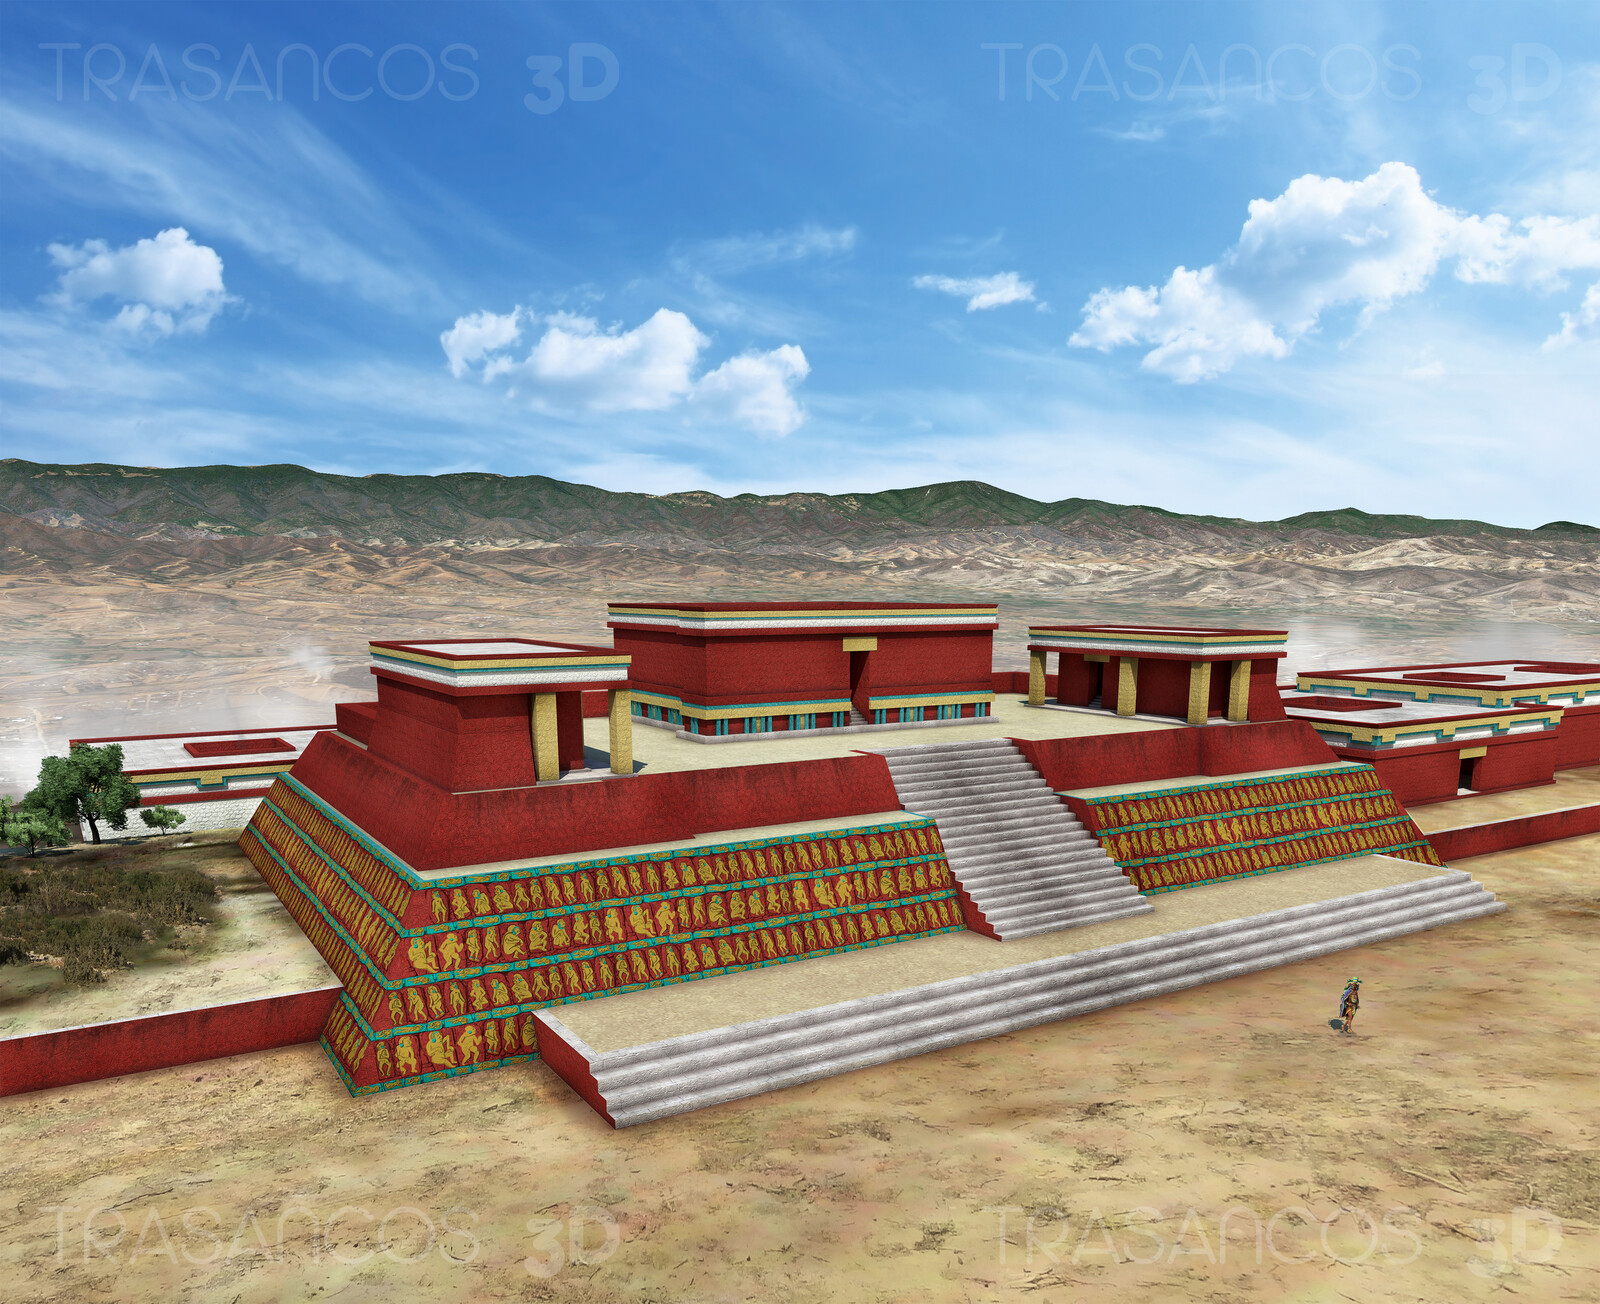 Reconstruction of the House of Dancers in Monte Albán.
Modeled in collaboration with:
- Carlos Paz